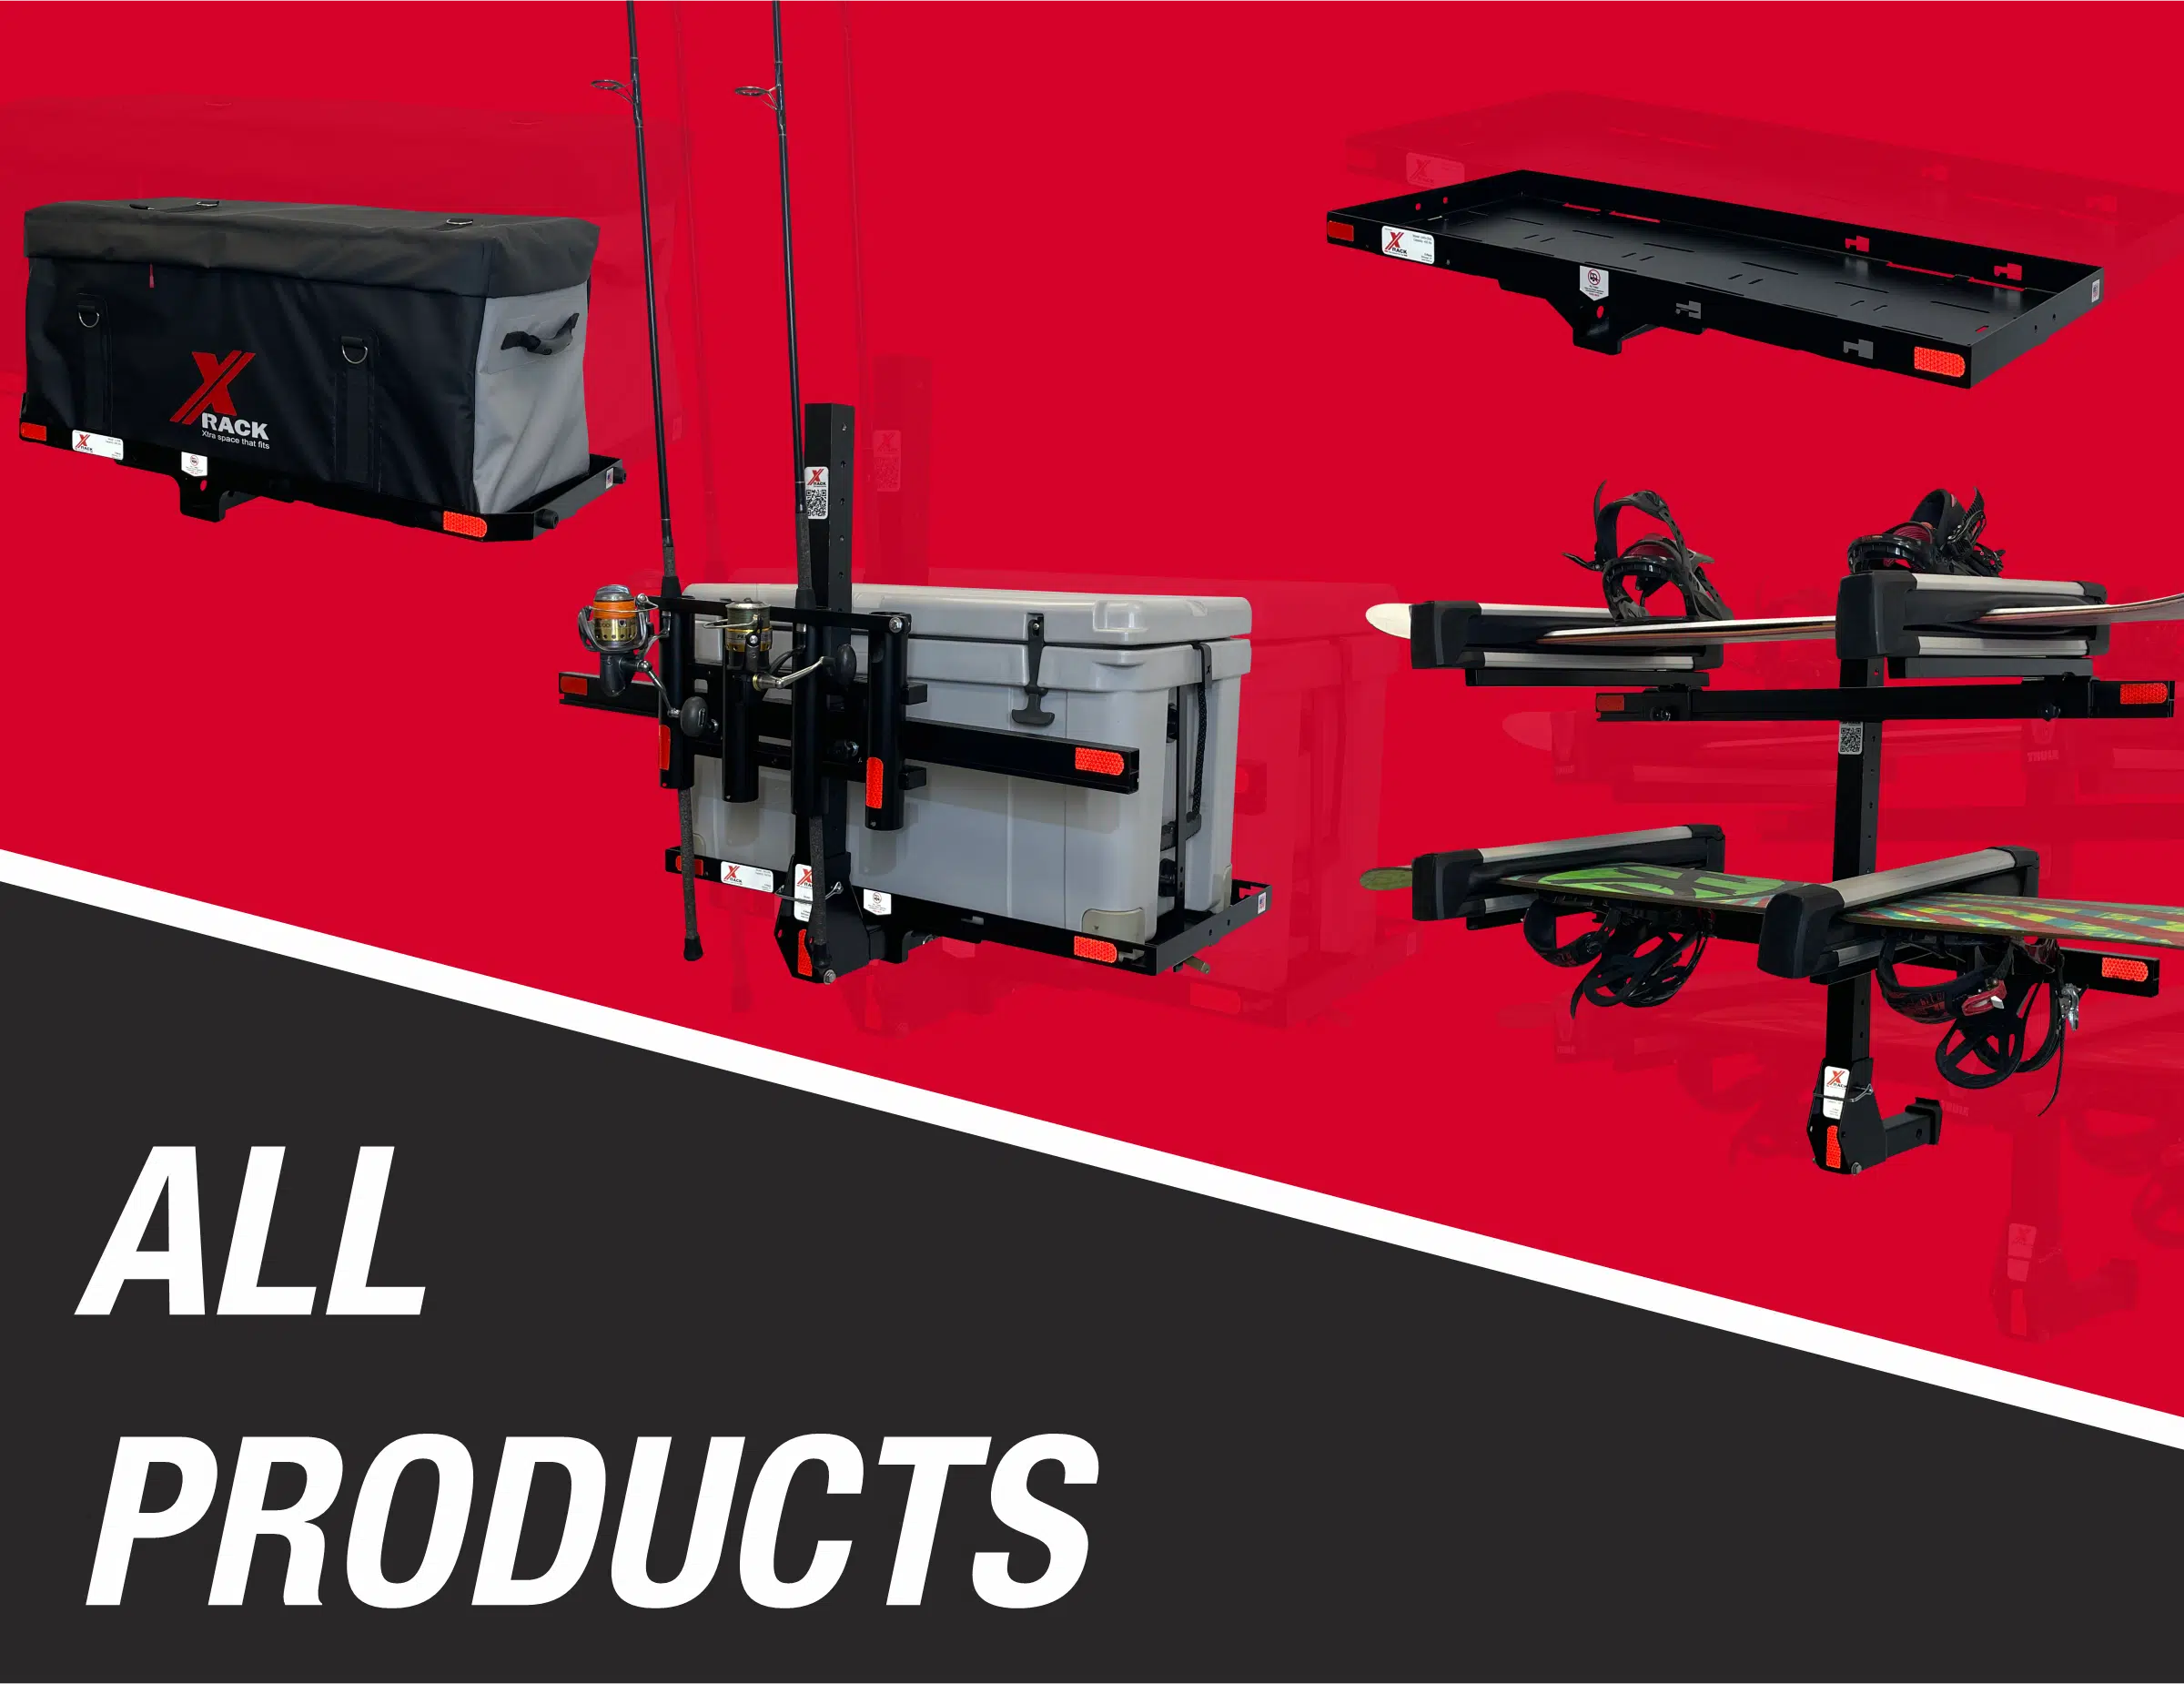 X-Rack  A new line of Hitch Cargo solutions and Fishing accessories